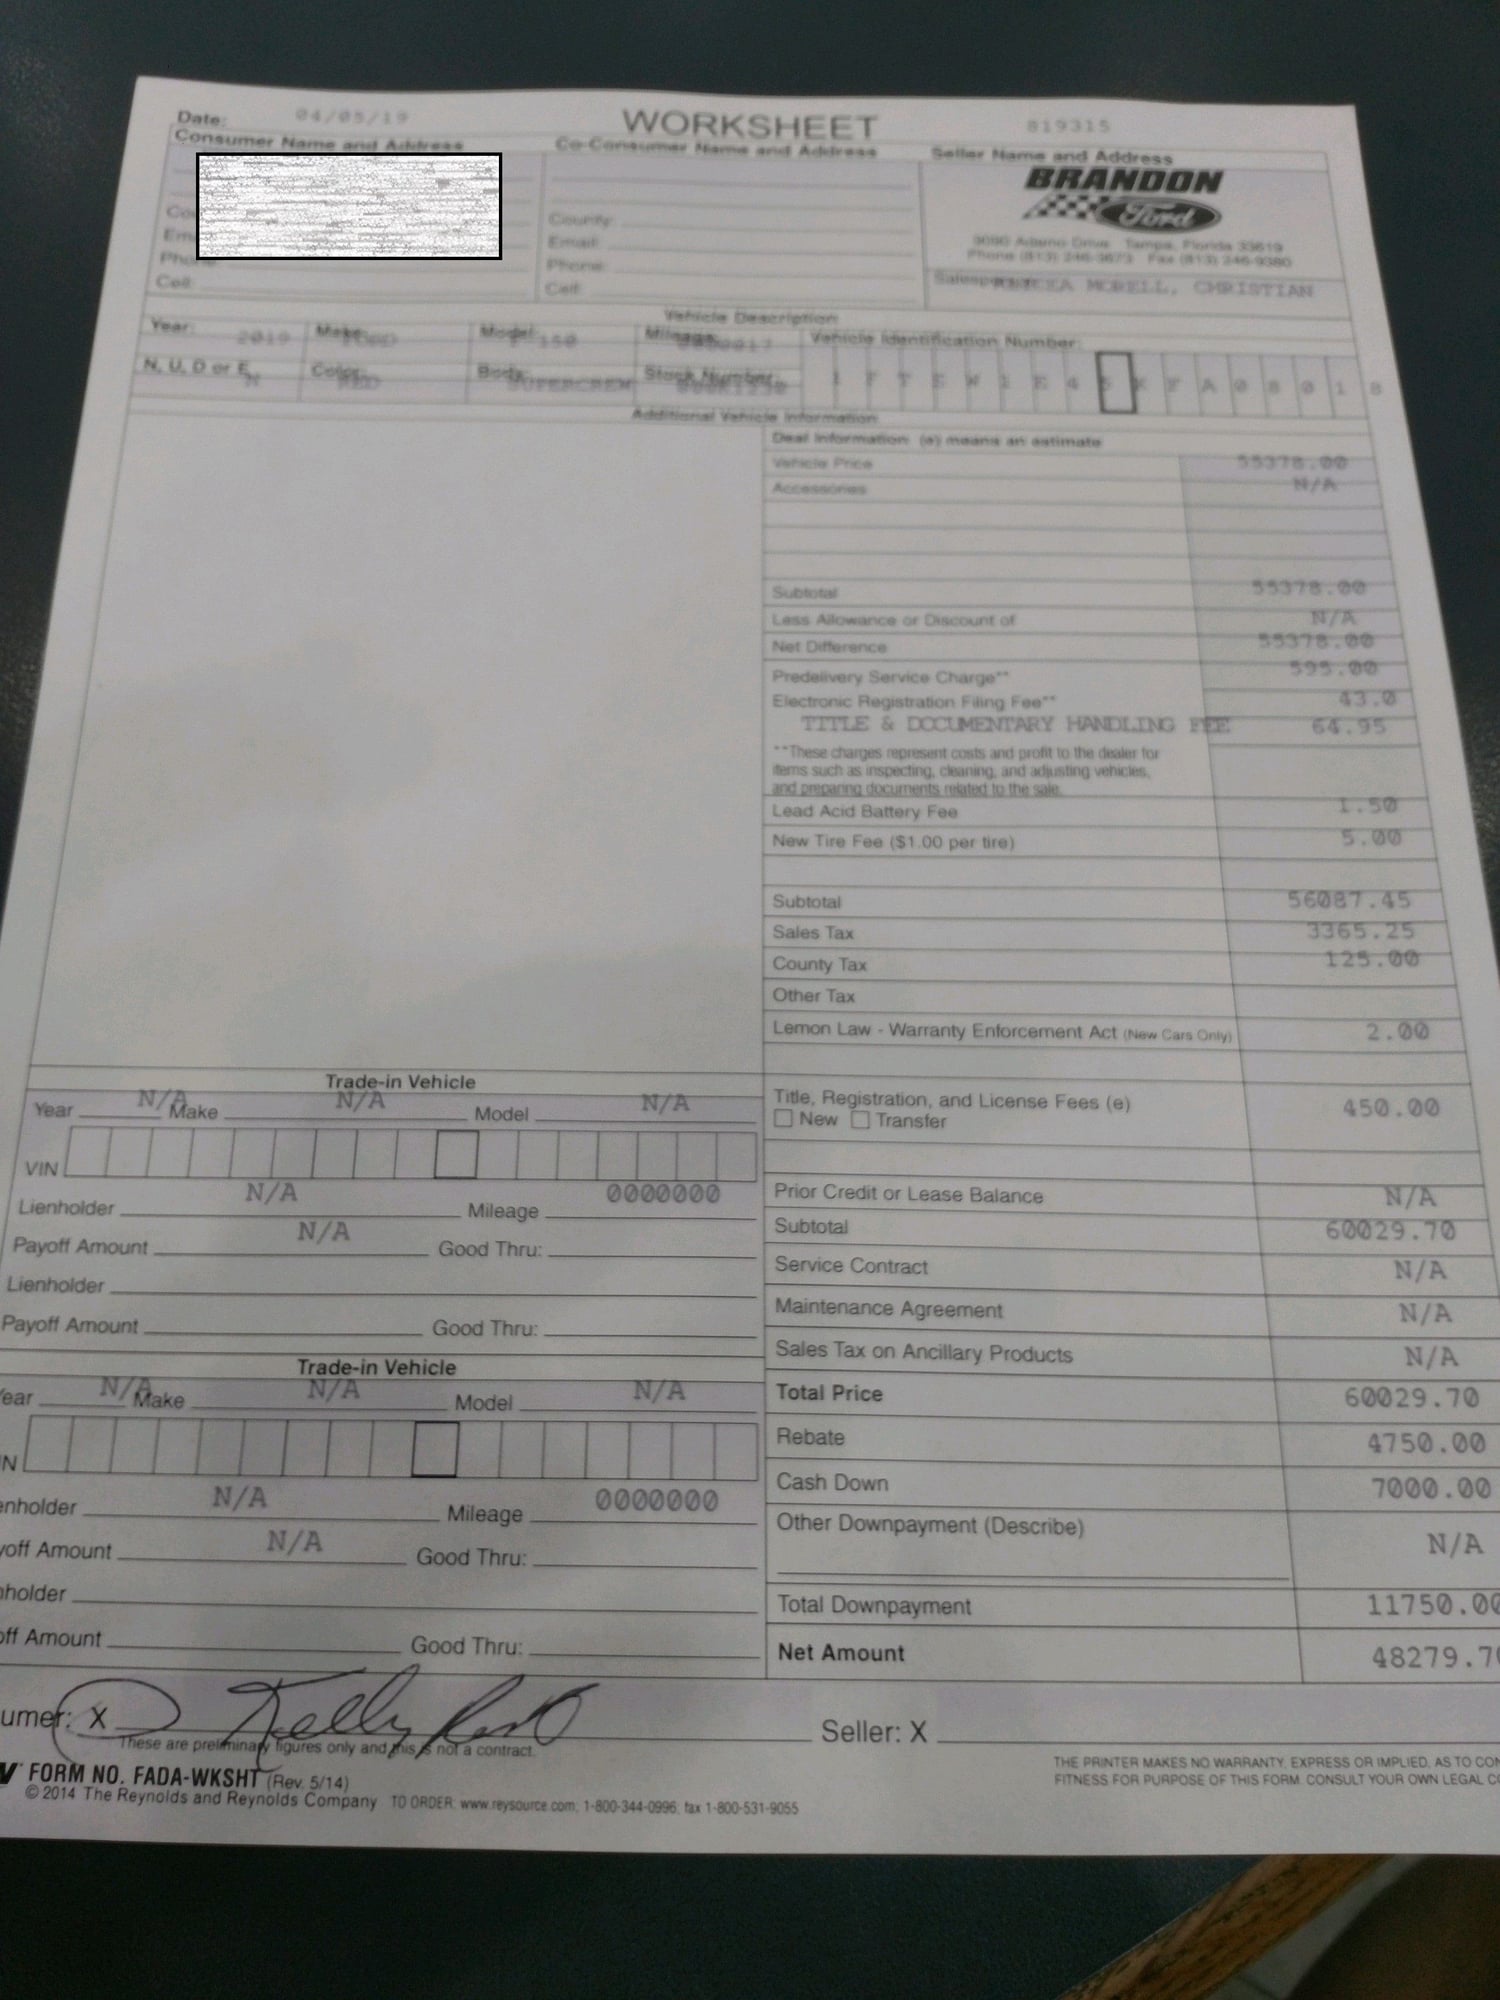 Just tell us your under invoice price paid. - Page 889 - Ford F150 ...